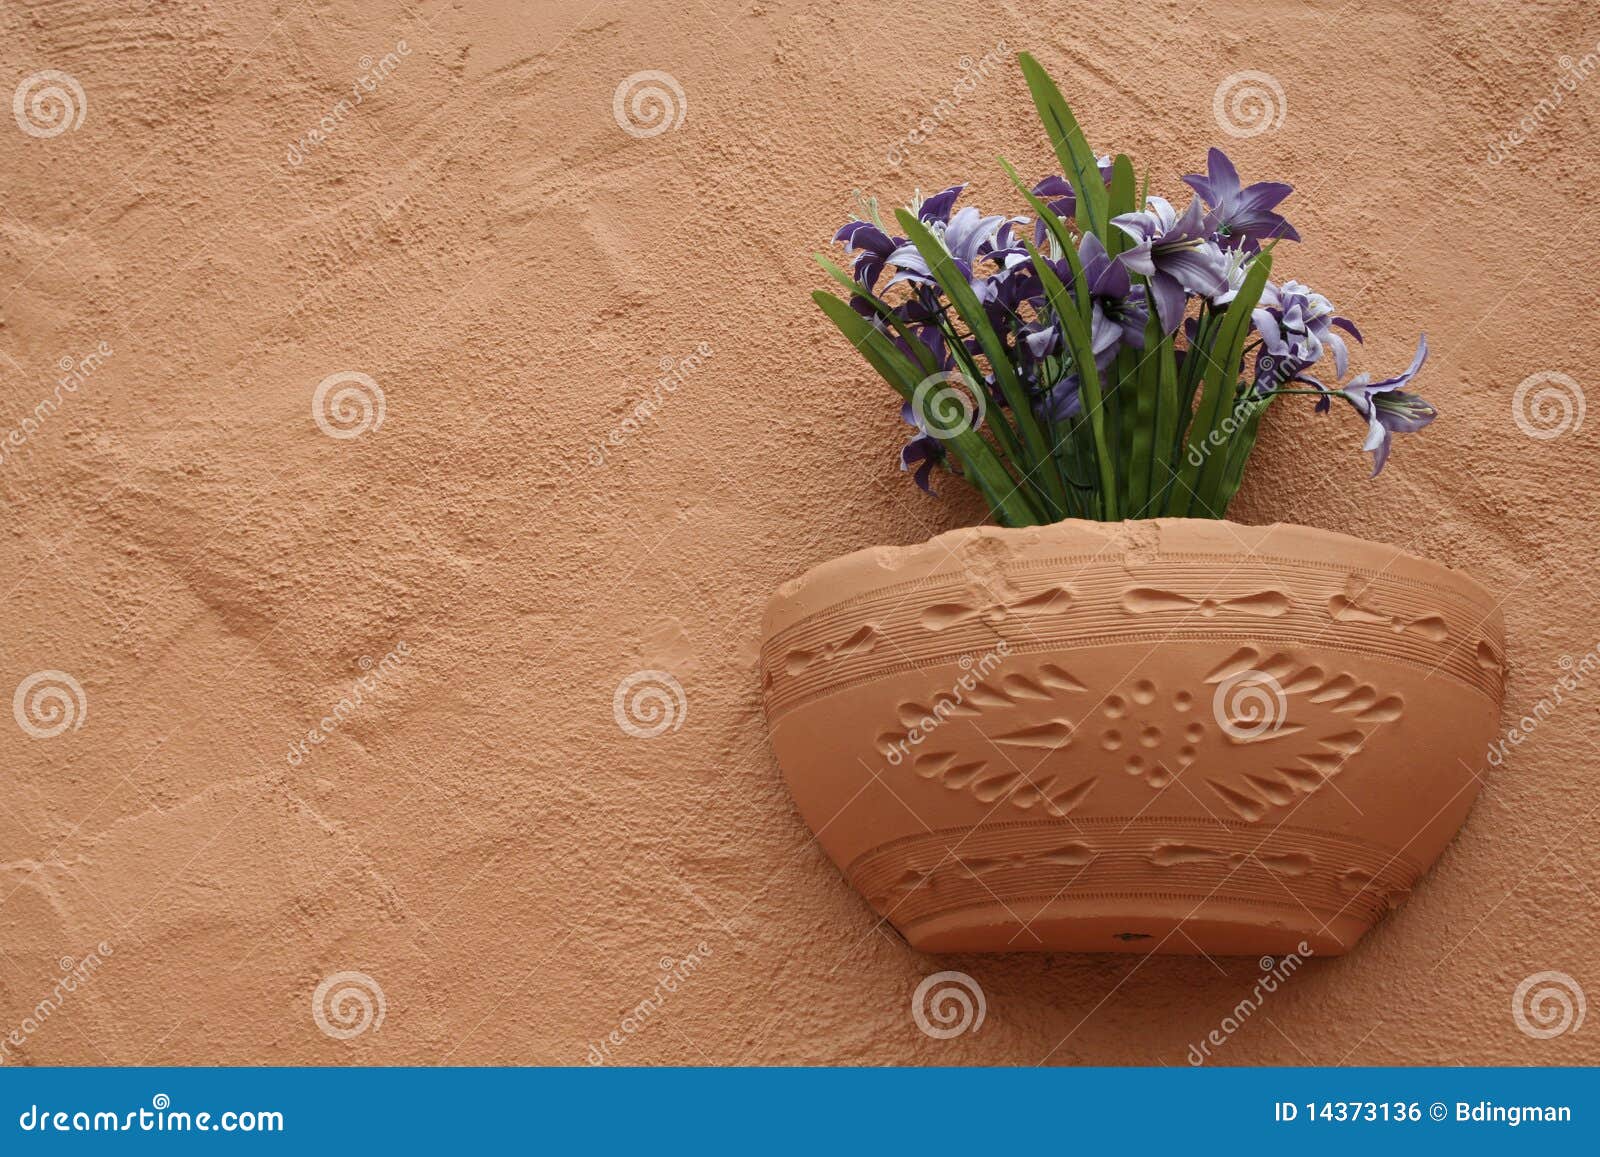 southwestern pottery and floral 